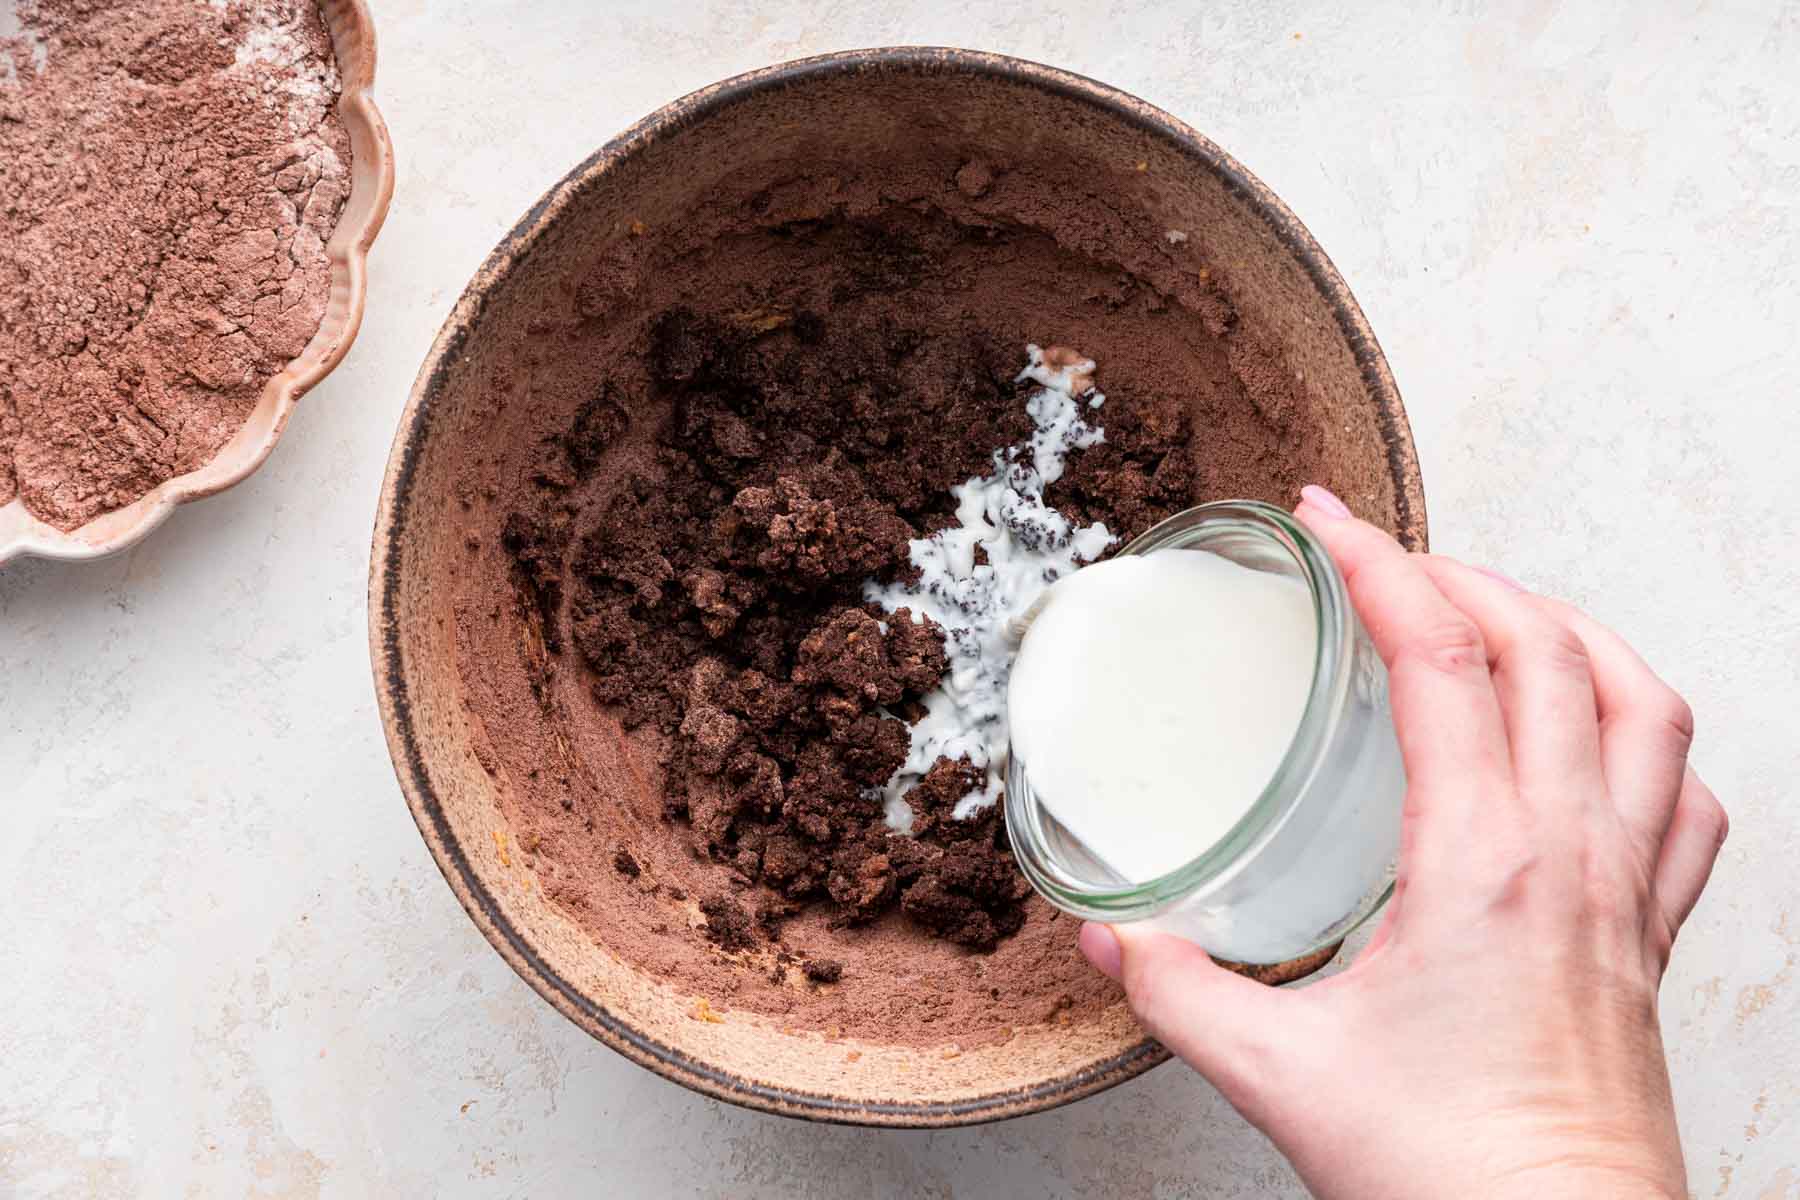 Hand pouring milk into brown dough in brown bowl.